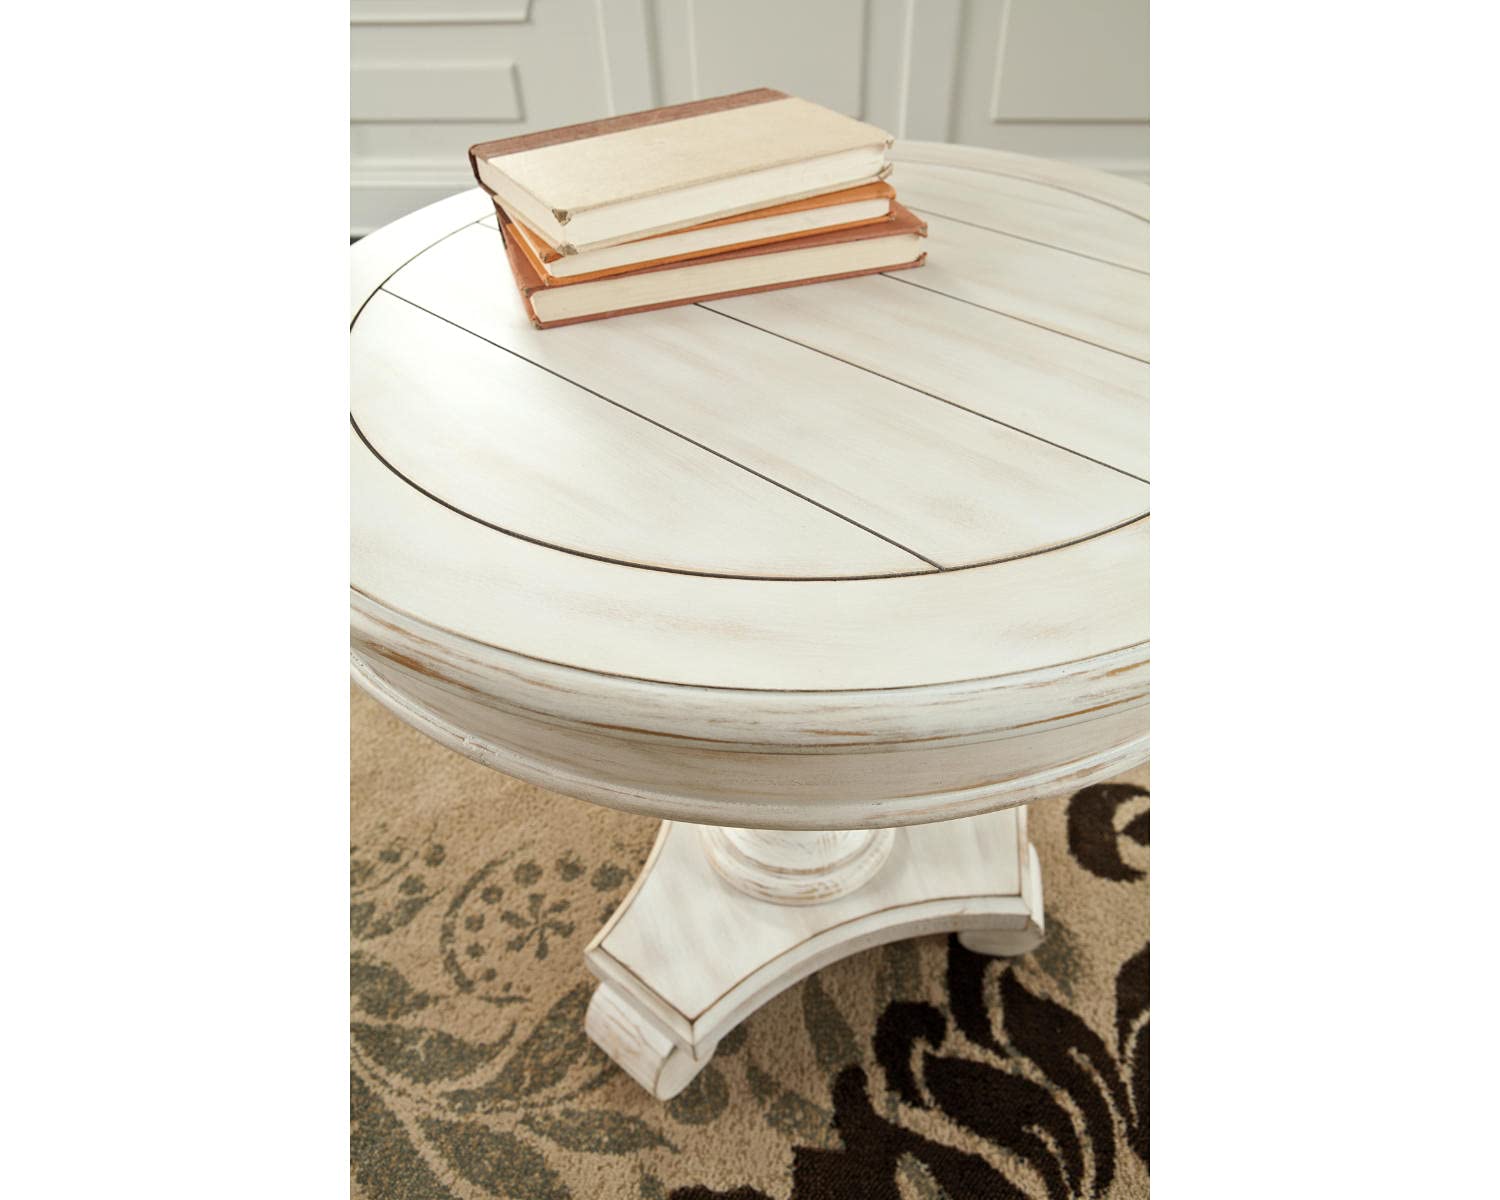 Signature Design by Ashley Mirimyn Cottage Vintage Hand-Finished Round Accent Table, Distressed White Finish